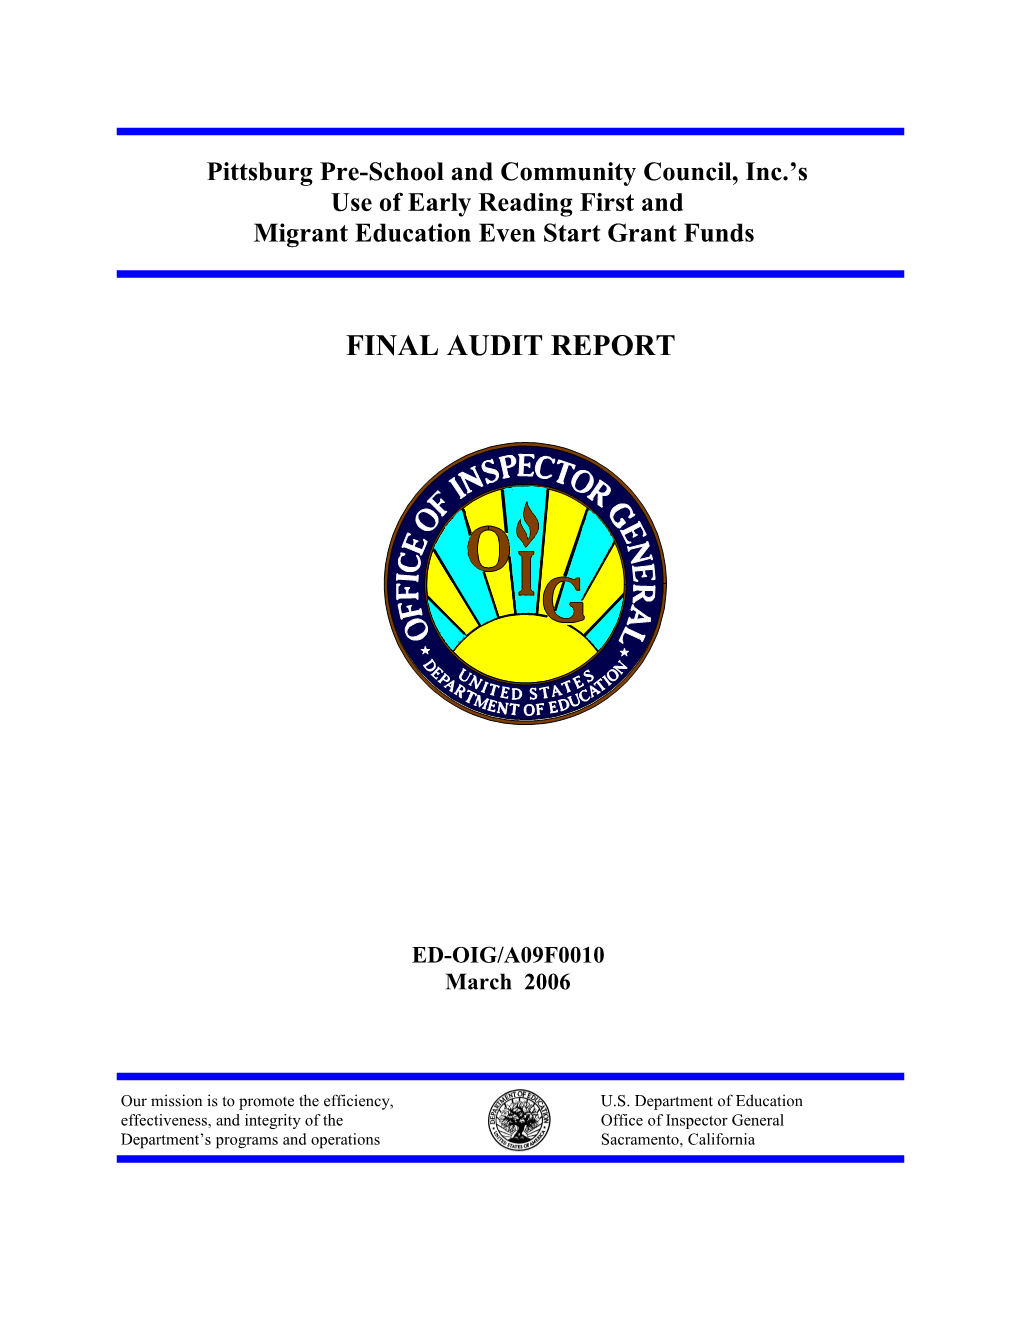 OIG Audit Report: Pittsburg Pre-School and Community Council, Inc.'S Use of Early Reading